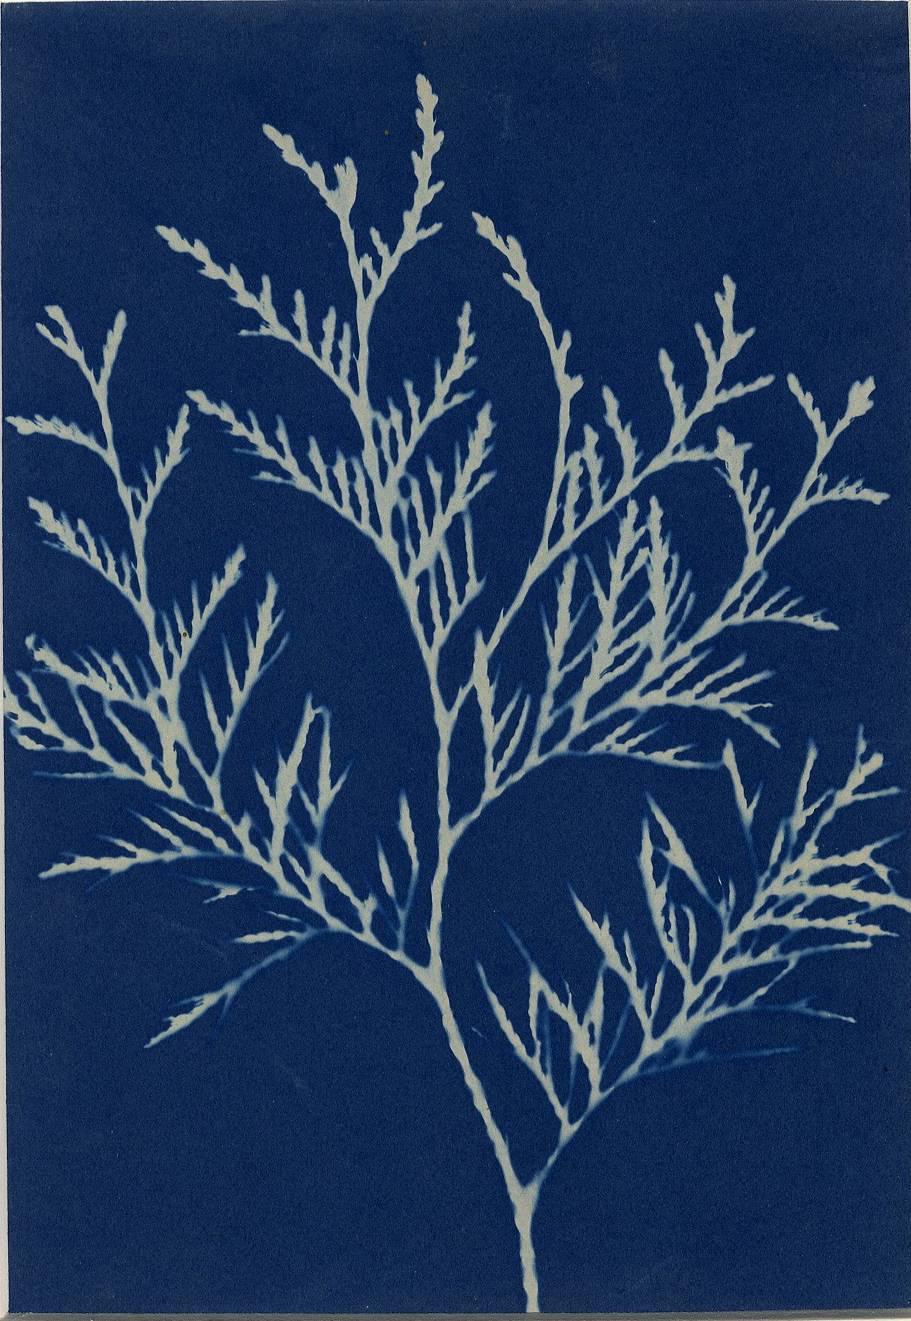 Unknown Still-Life Photograph - Cyanotype of Plant Forms